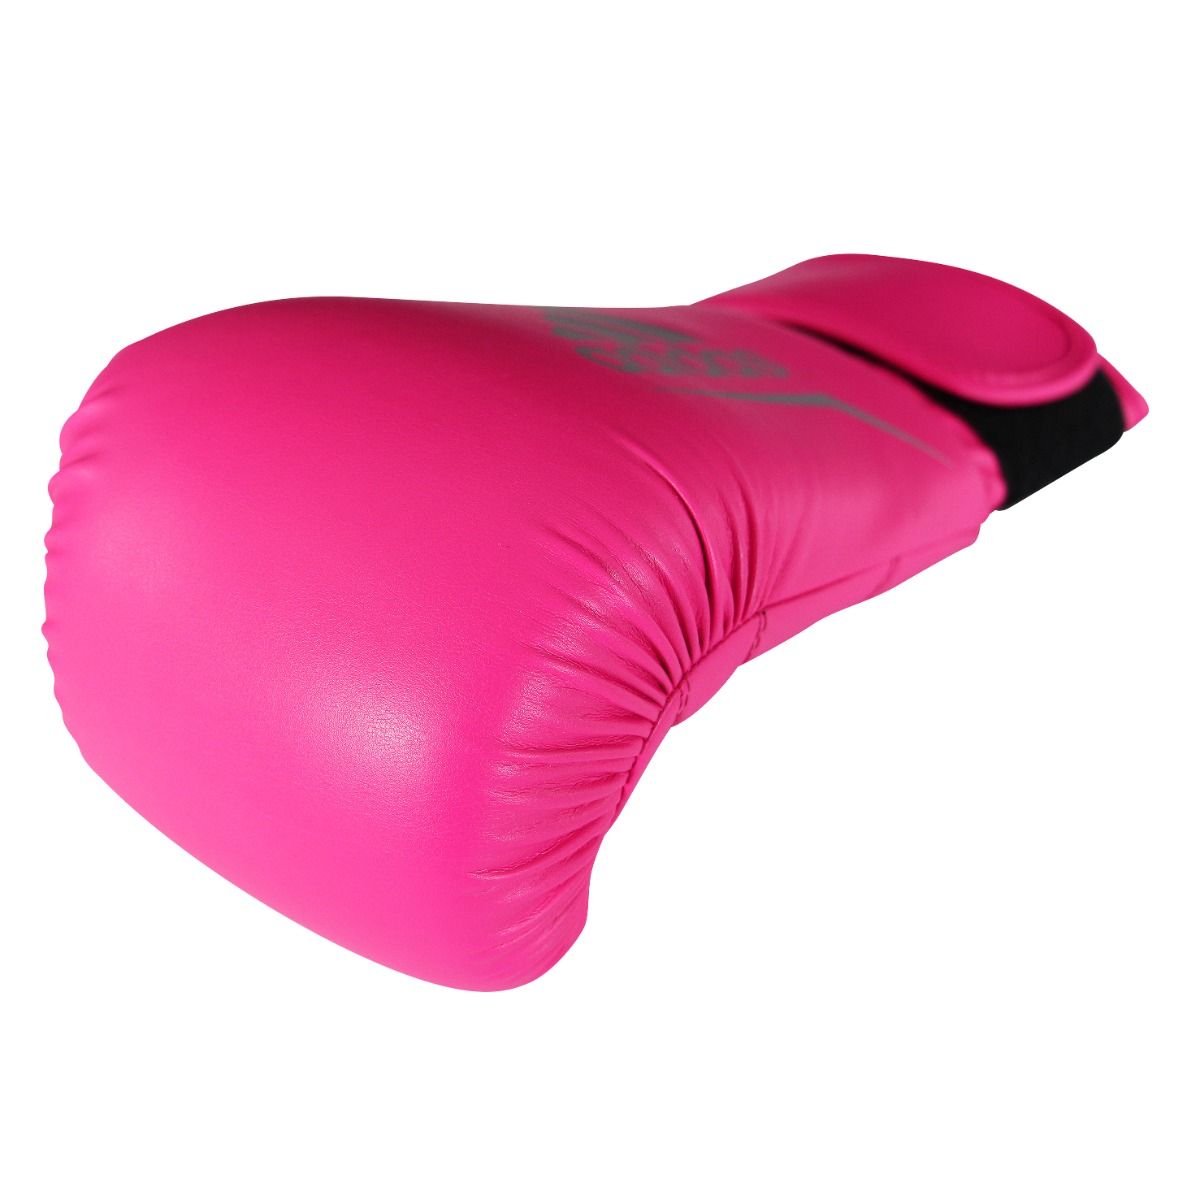 ADIDAS SPEED 50 WOMEN'S BOXING GLOVES